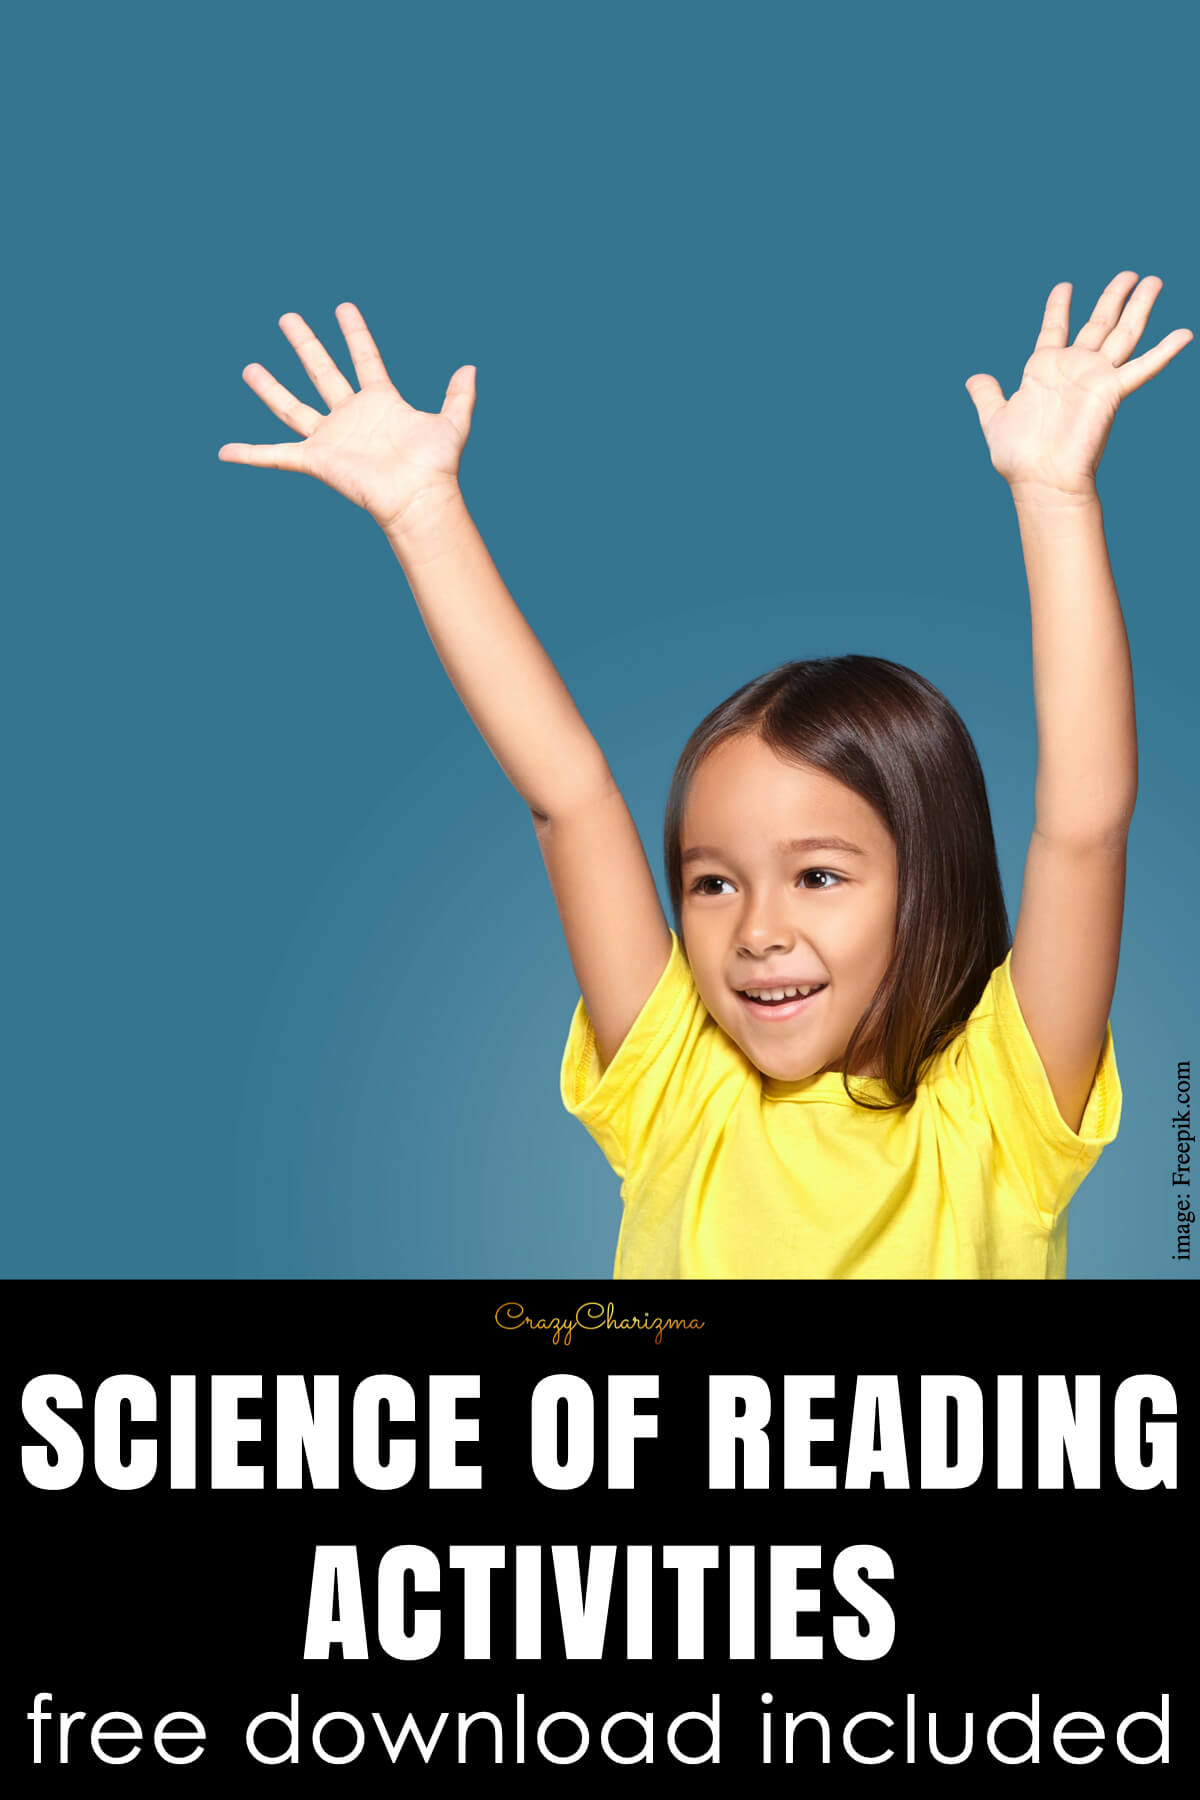 Science of Reading Activities (Free Download Included)